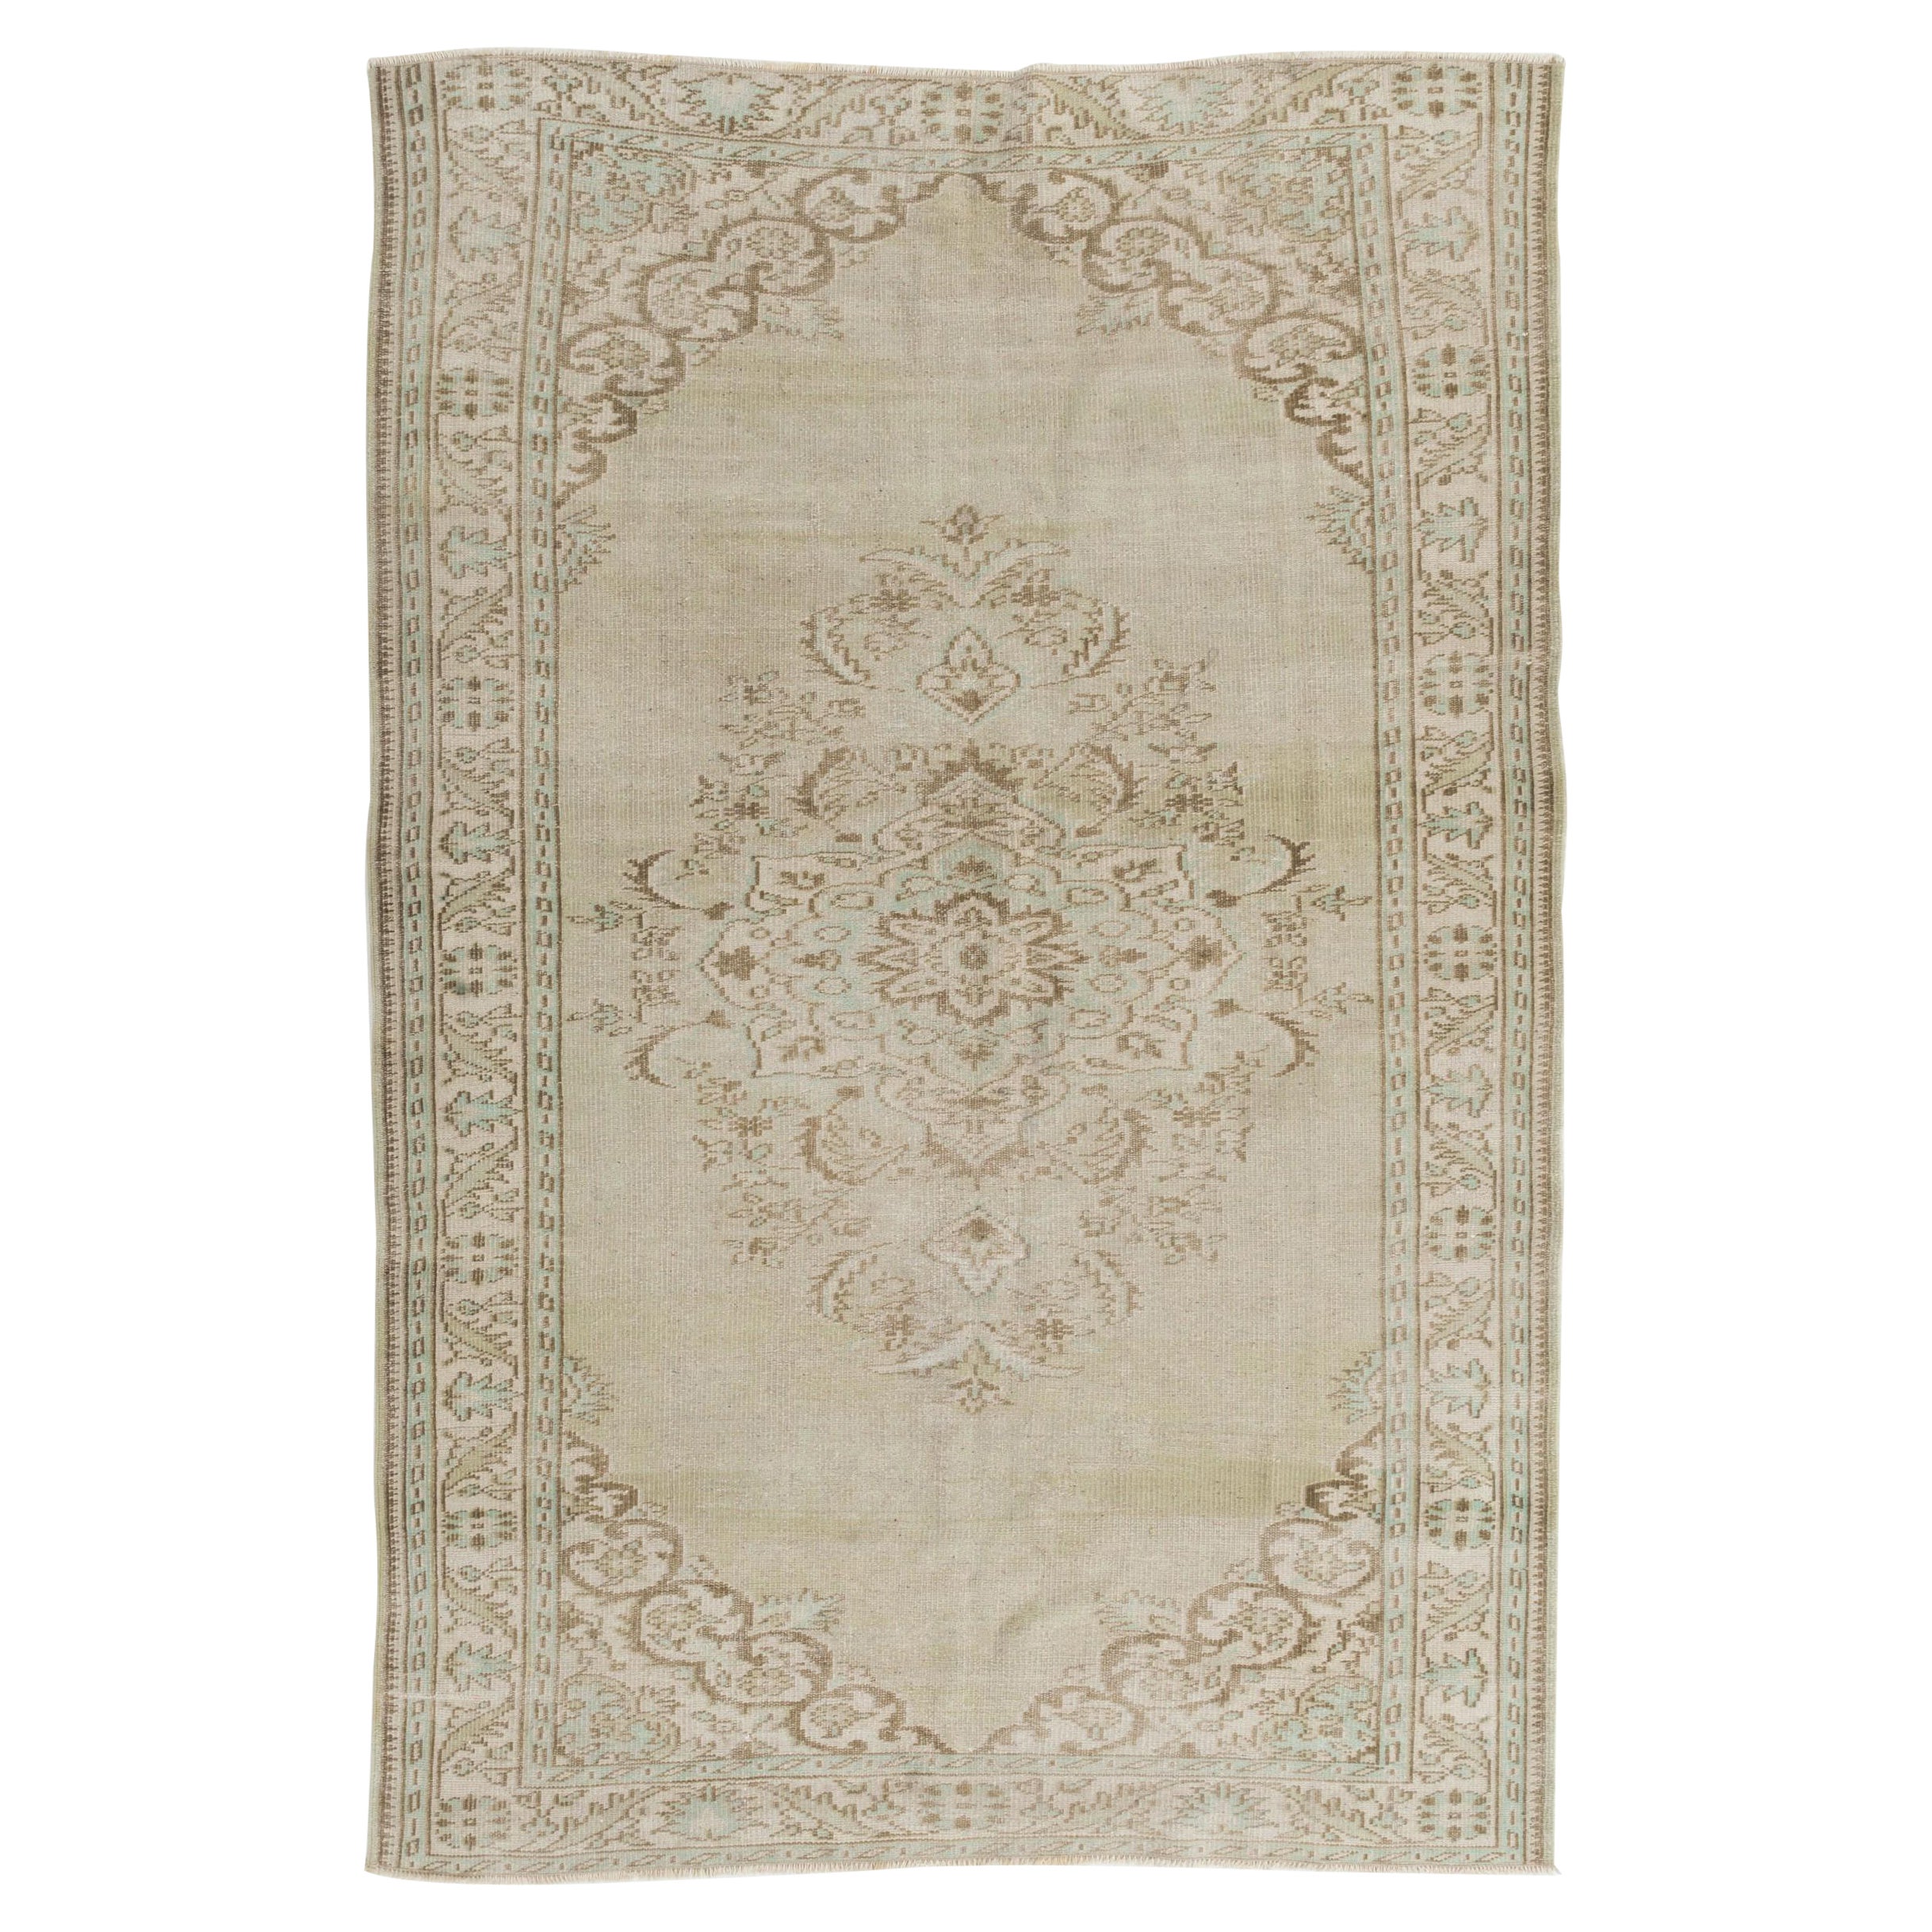 6x8.8 ft Hand-Made Vintage Anatolian Oushak Rug in Neutral Colors